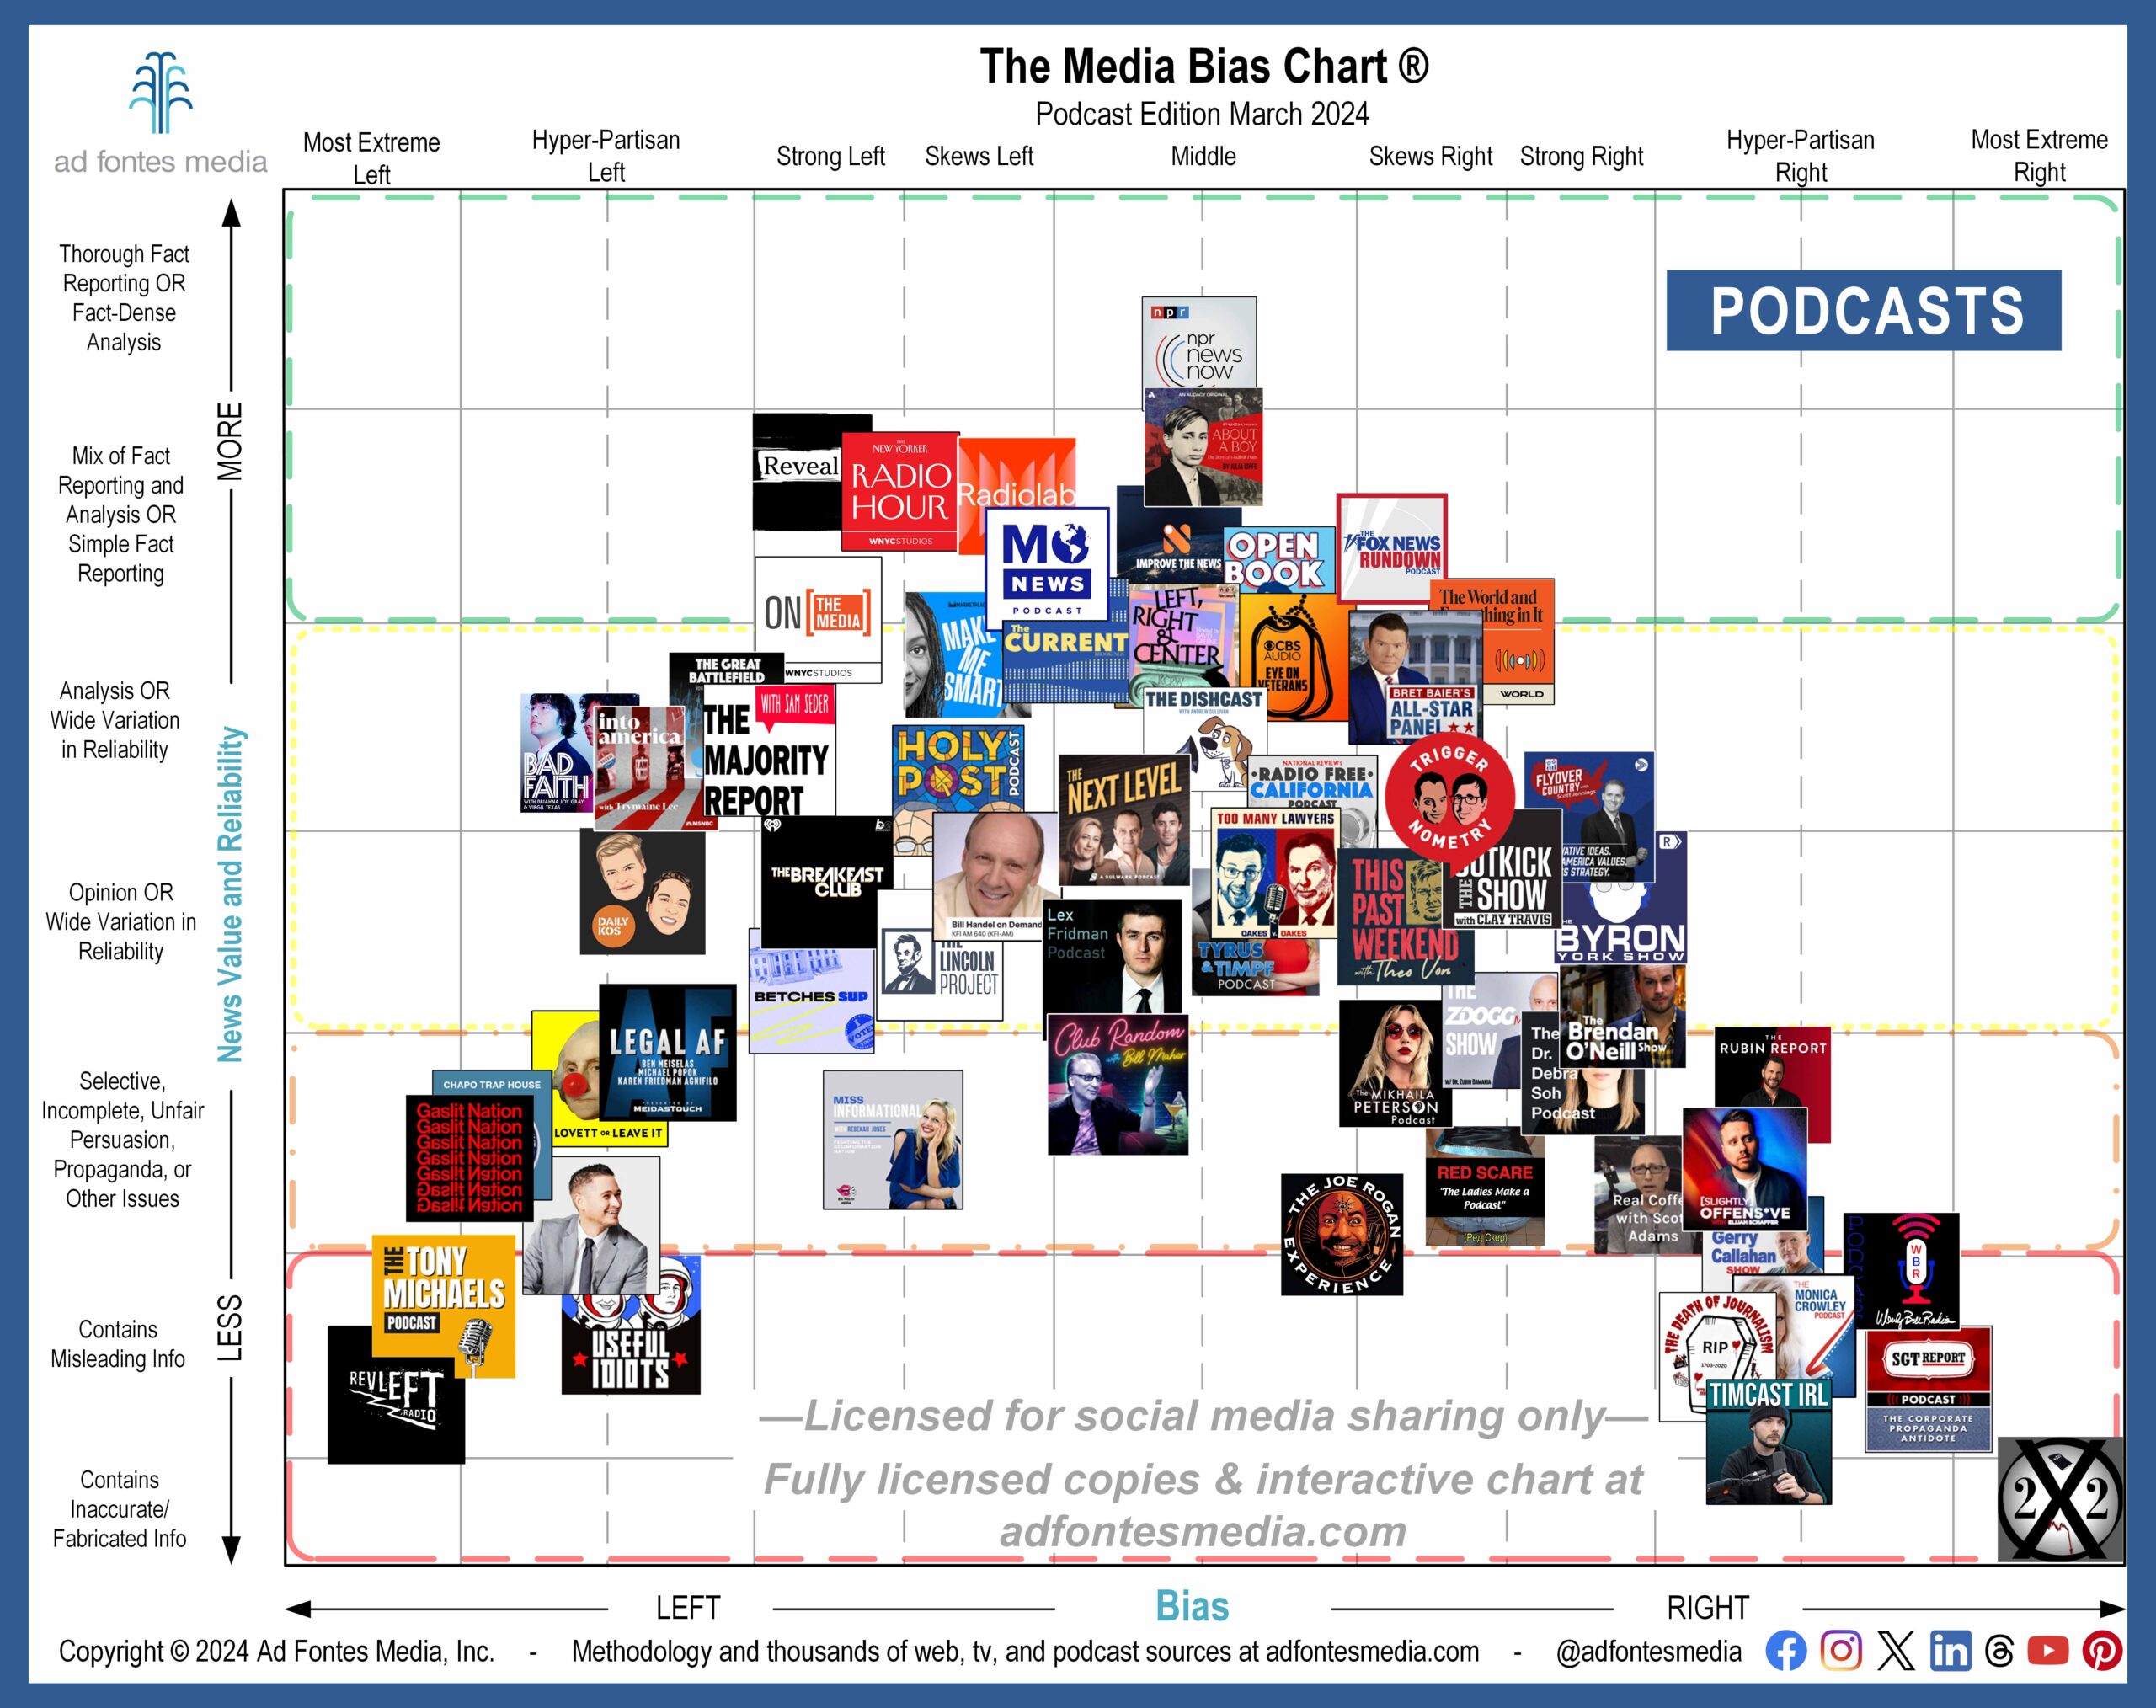 Media Bias Chart features 63 podcasts on its monthly chart, 10 of them for the first time